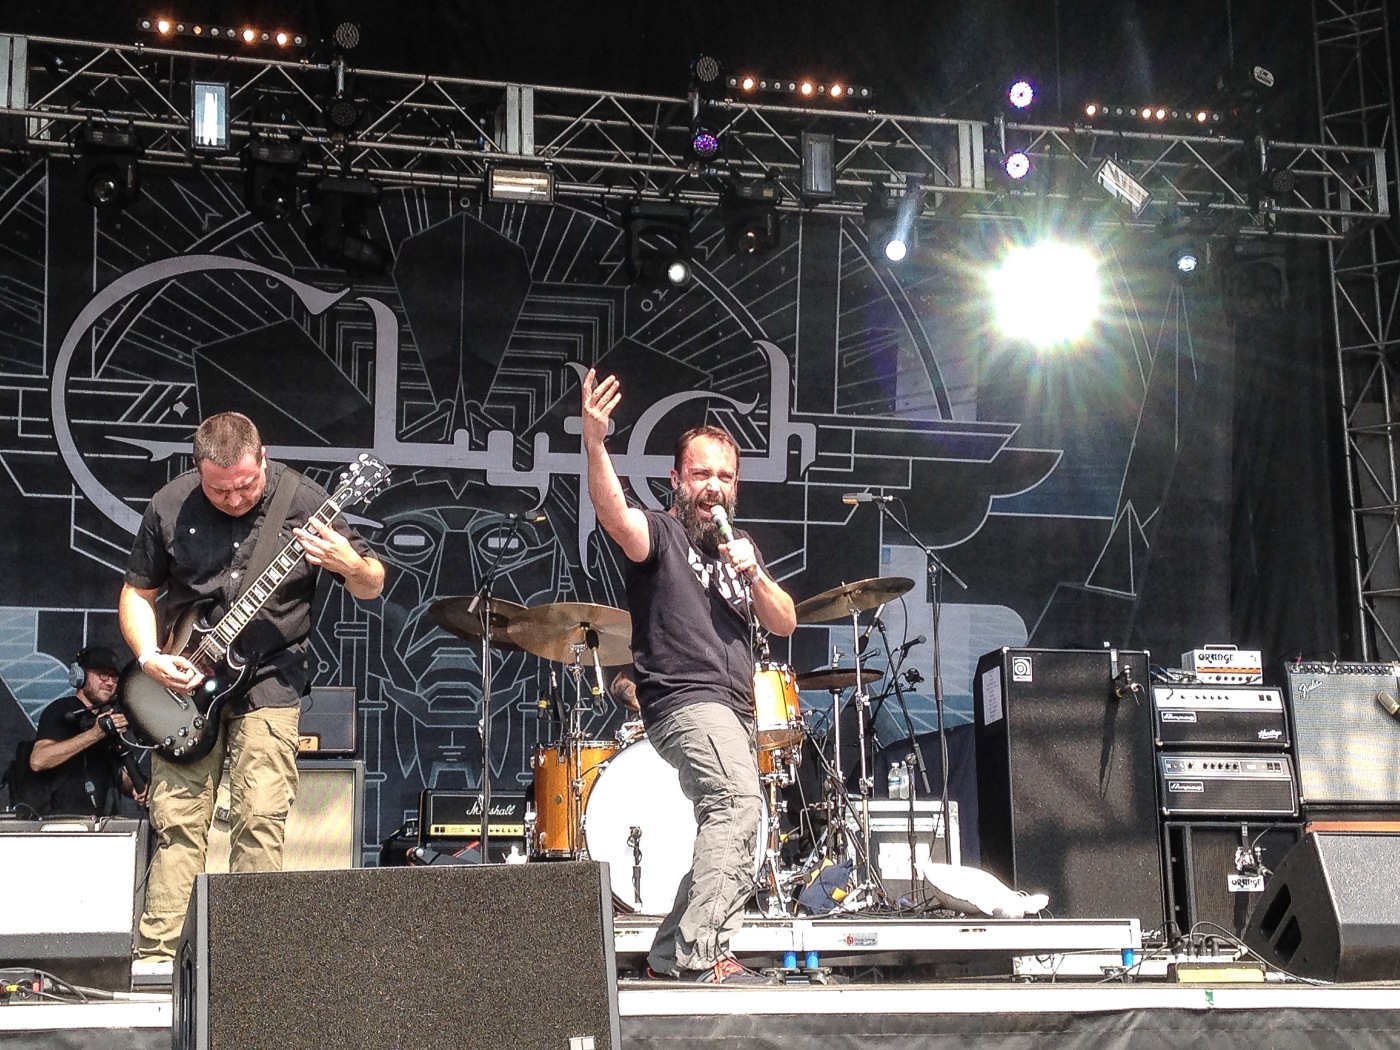 Dan maines of clutch interview at shaky knees music and arts festival â concert hopper